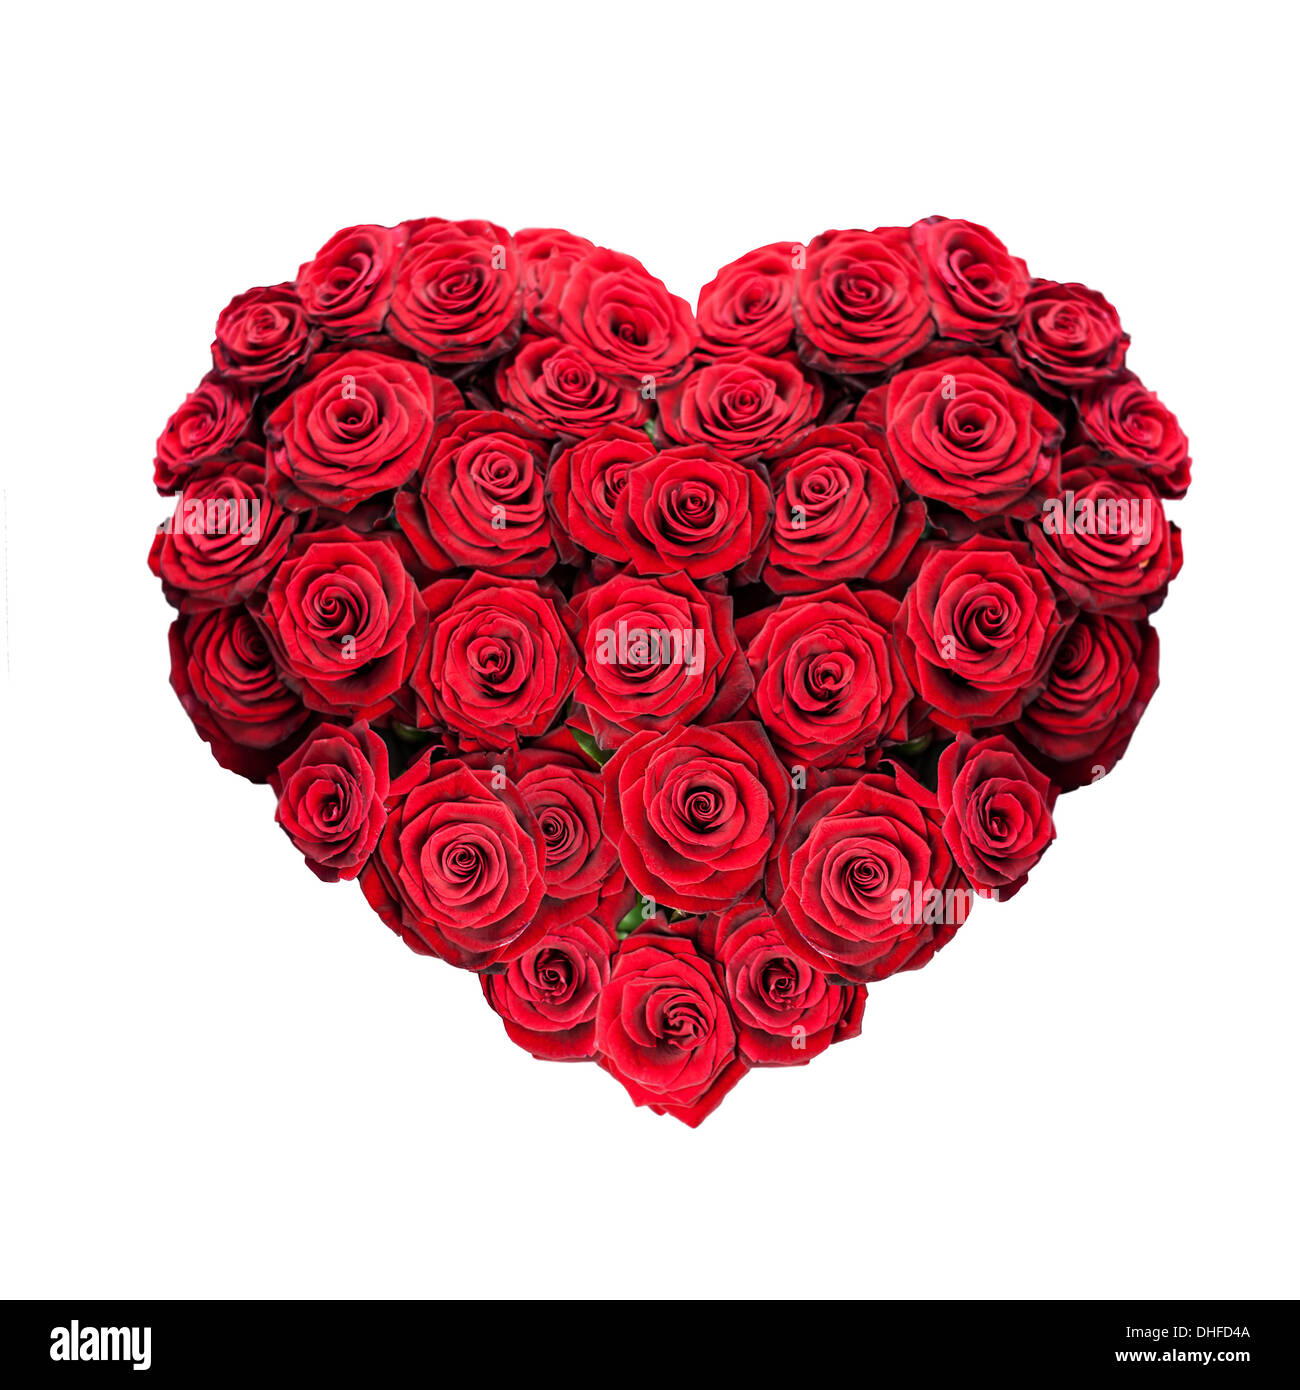 Red heart rose flowers hi-res stock photography images - Alamy